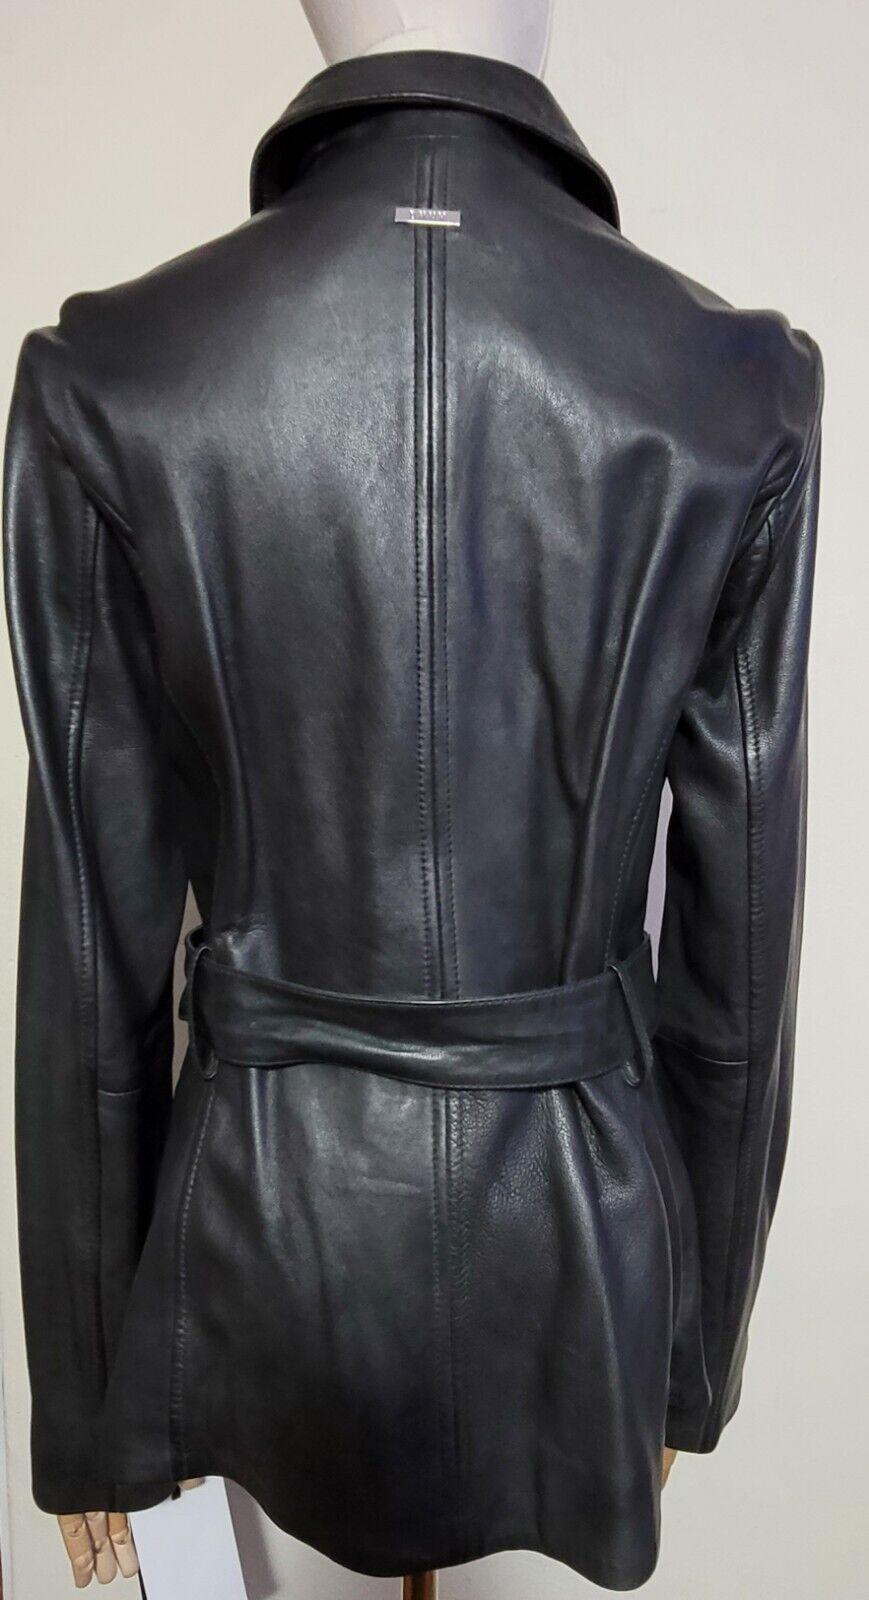 DKNY Womens Military Style Black Belted Leather  Jacket Size S - SVNYFancy